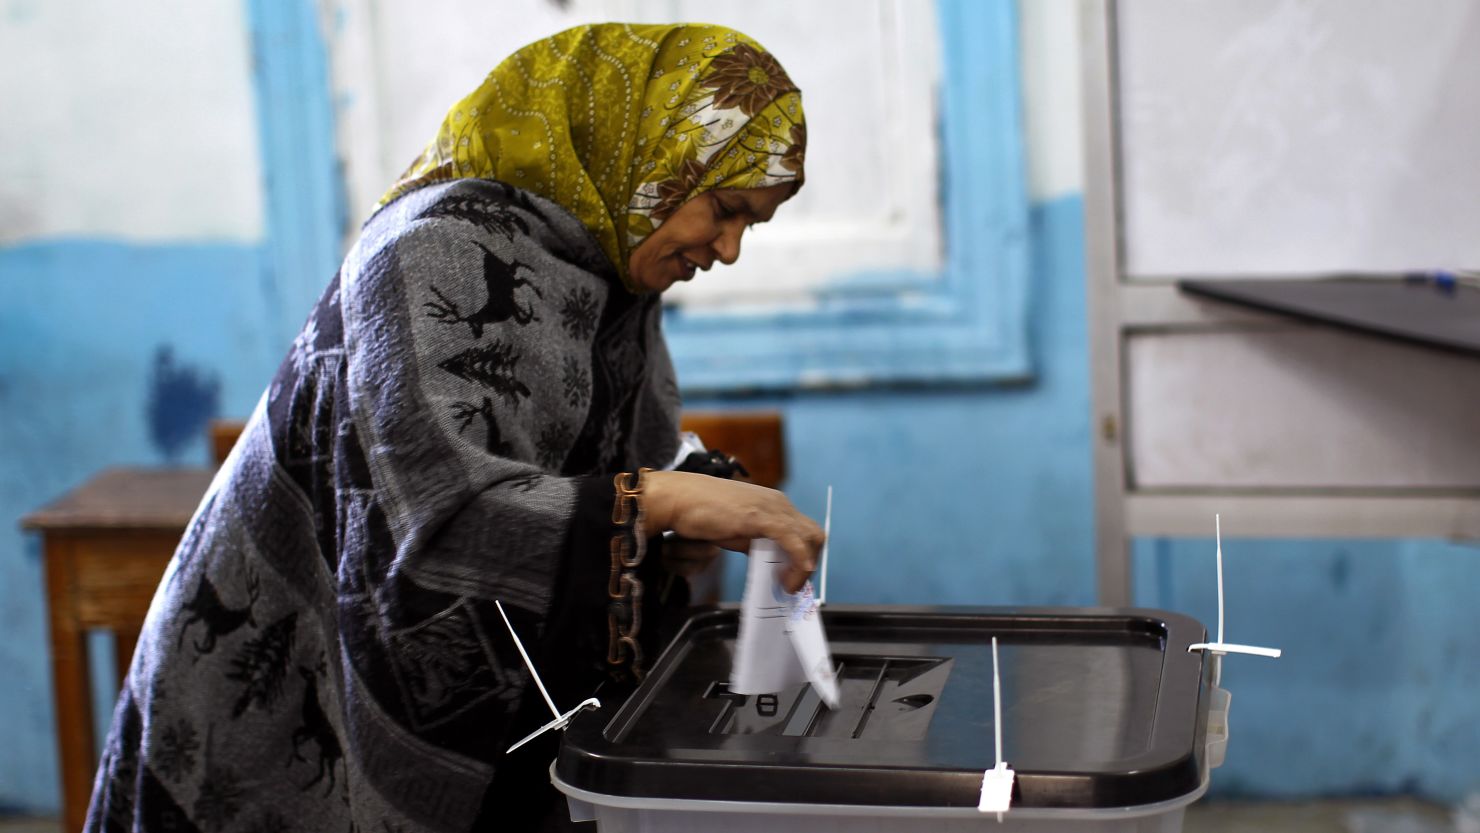 Egypt will hold a key referendum on January 14-15 on a new constitution.